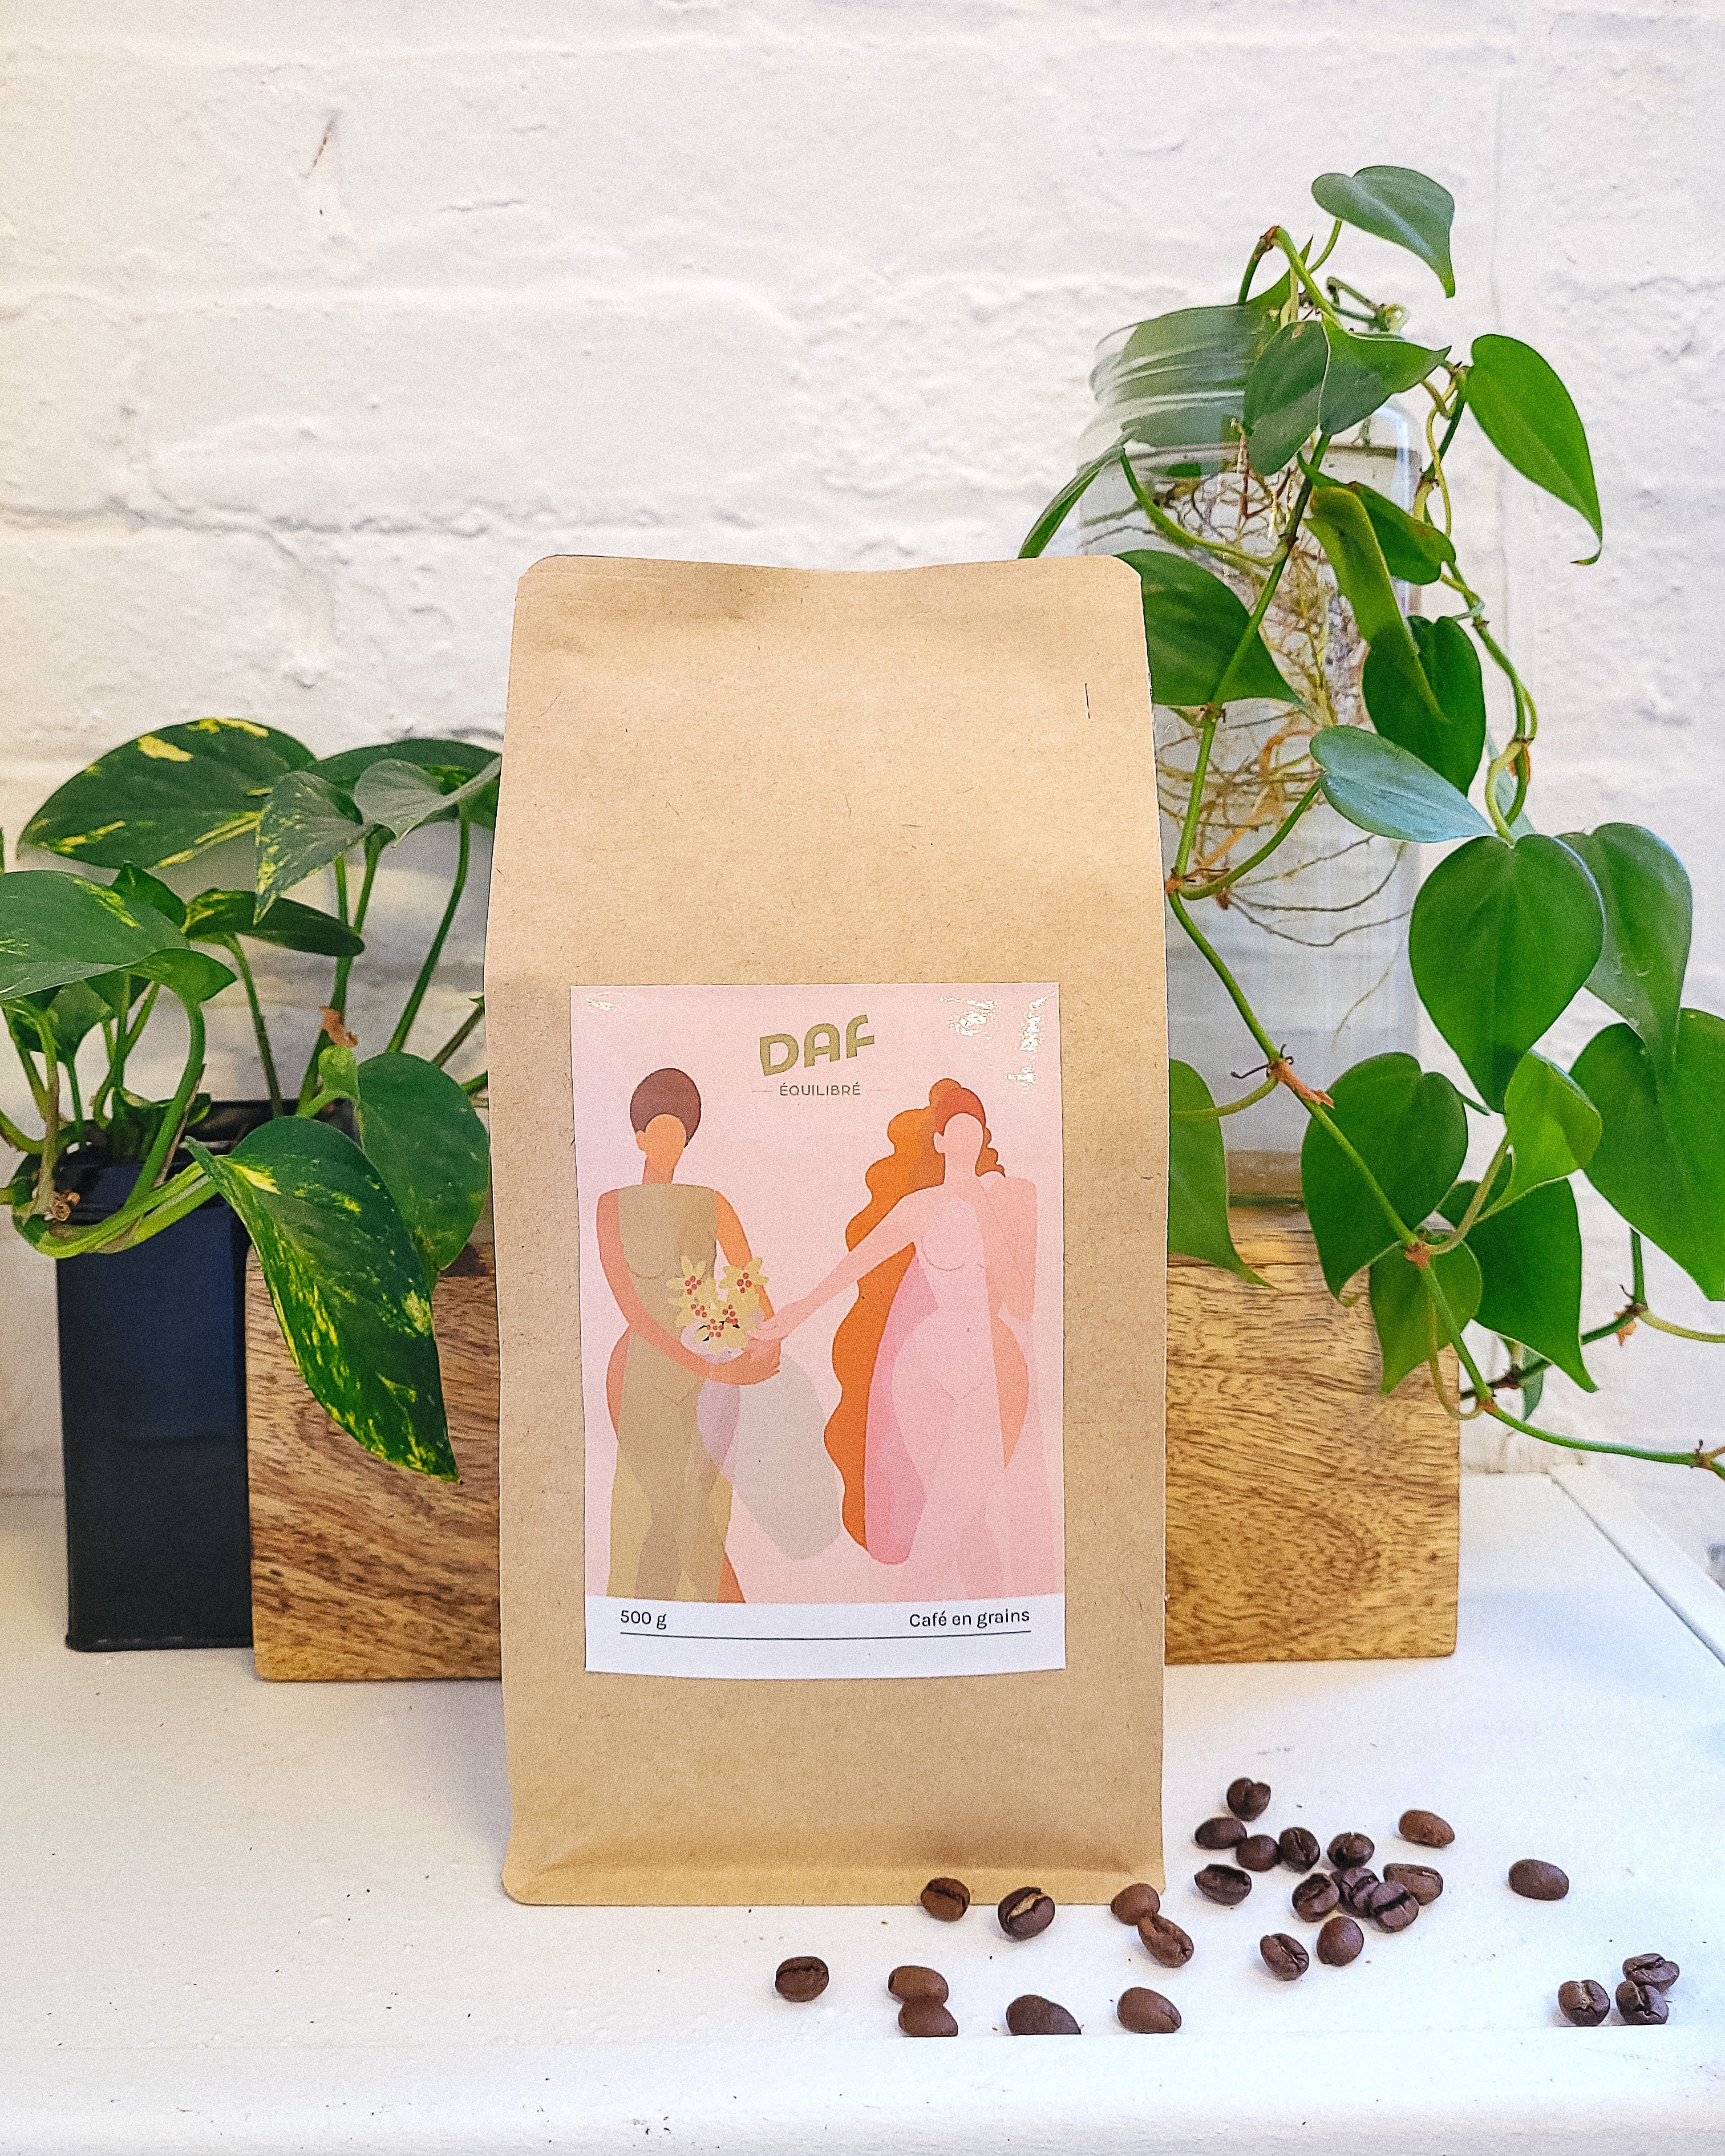 3 MONTHS OF FREE COFFEE - 3 bags x 500g - Local coffee beans -